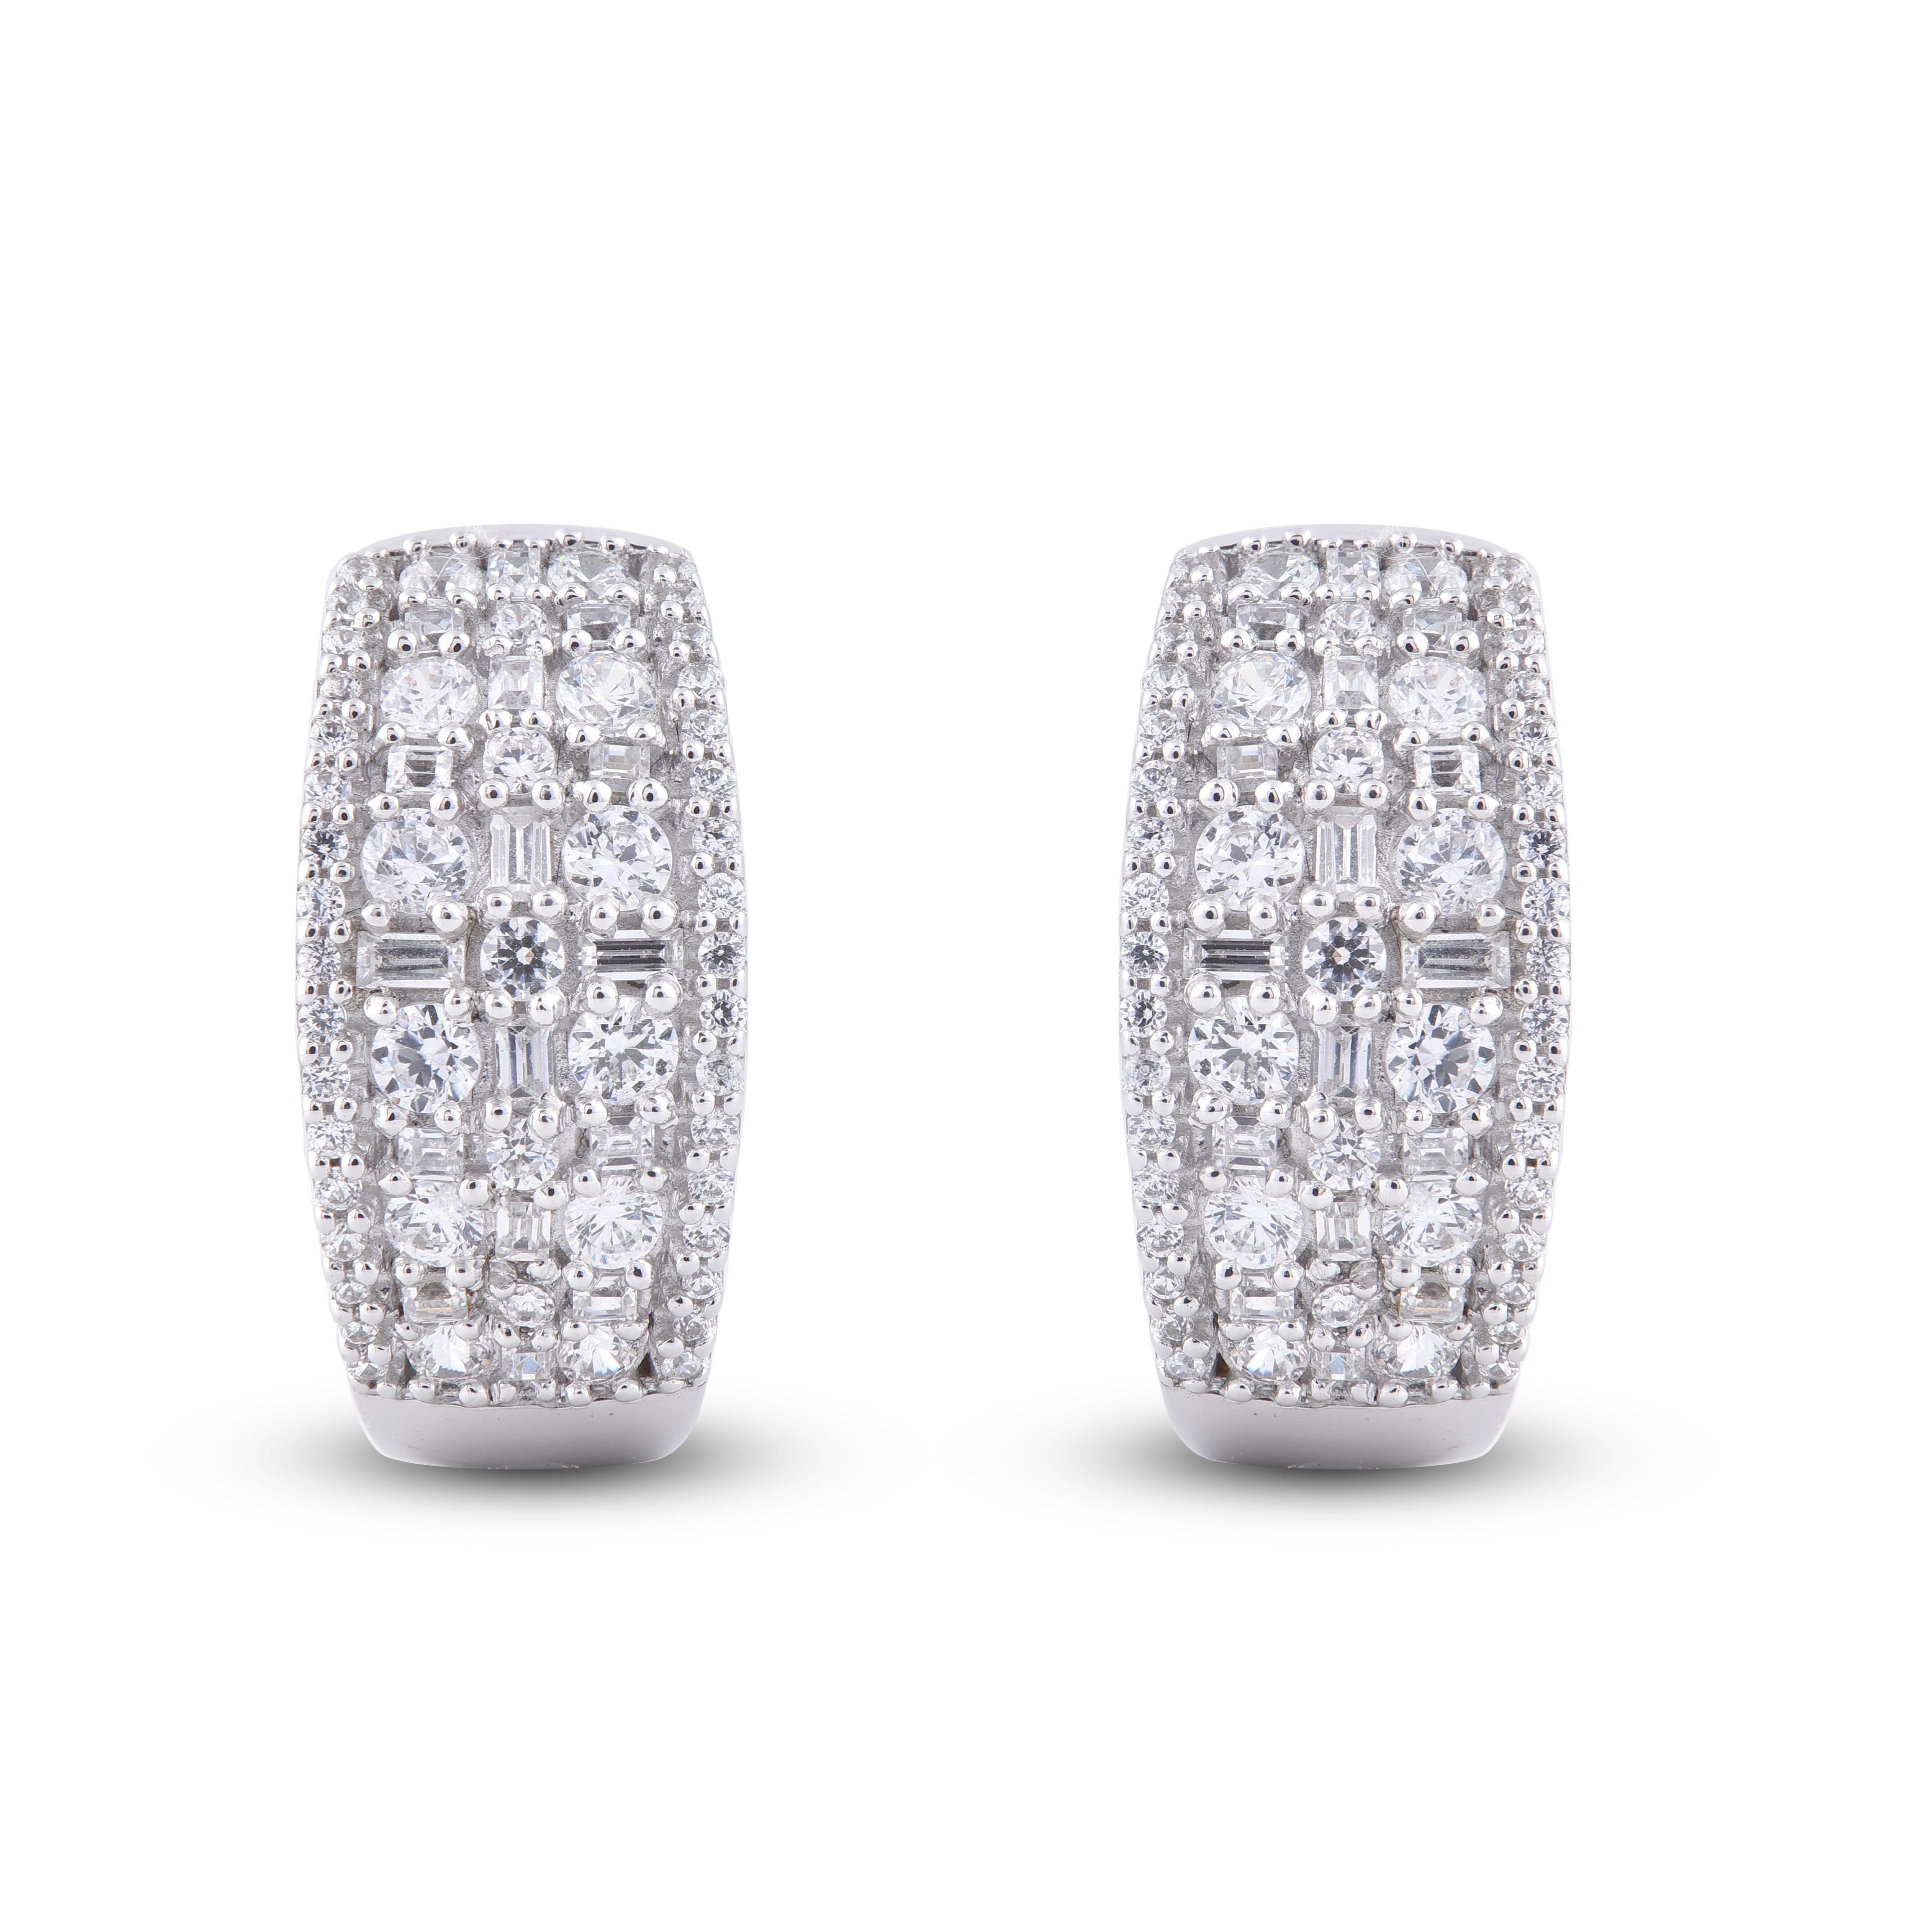 This Sparkling Baguette and White Round Diamonds earrings gives great presence on the ear. This earring is fashionated with 102 round white diamond and 32 Baguette diamond in 14 karat white gold shines with in H-I color I2 clarity. it secures